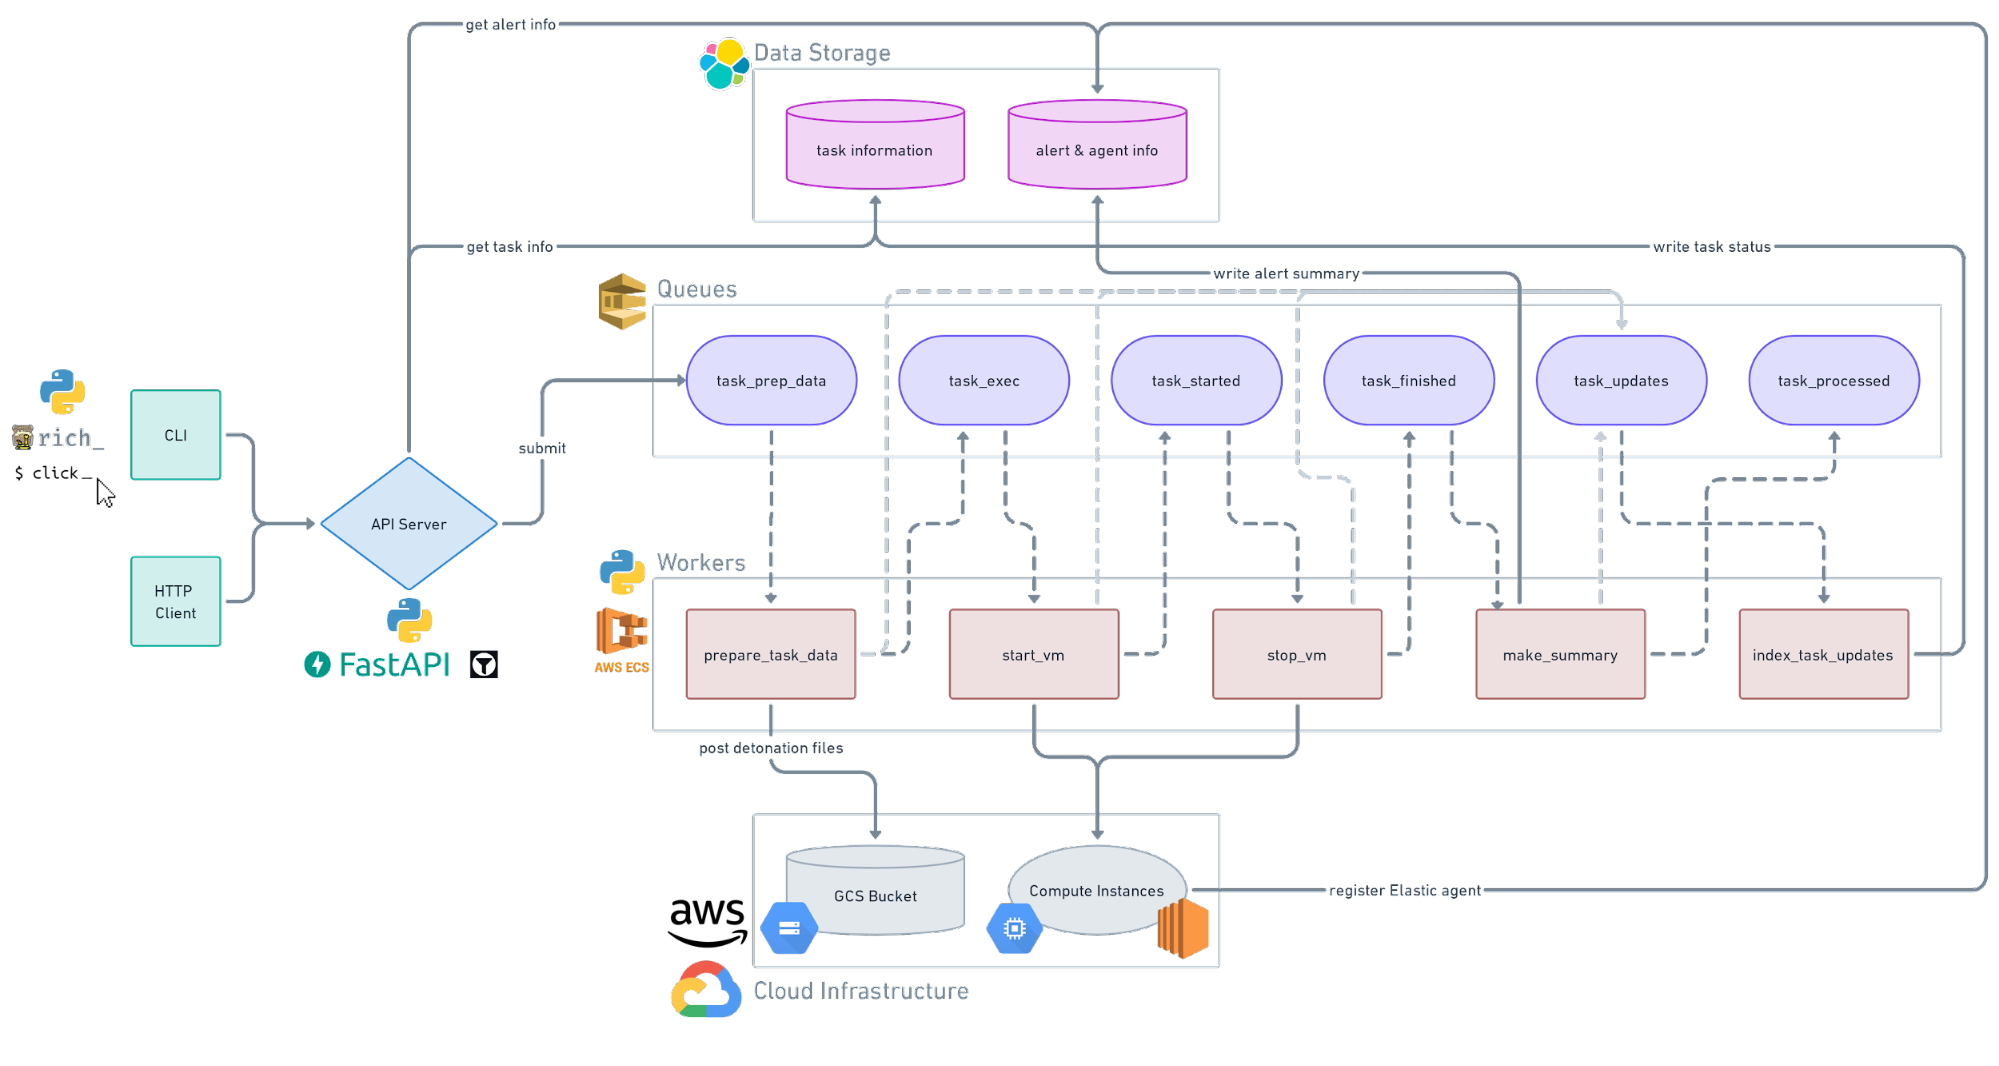 A system architecture diagram with shapes representing services, cloud infrastructure, and queues, and arrows showing how information flows between them.